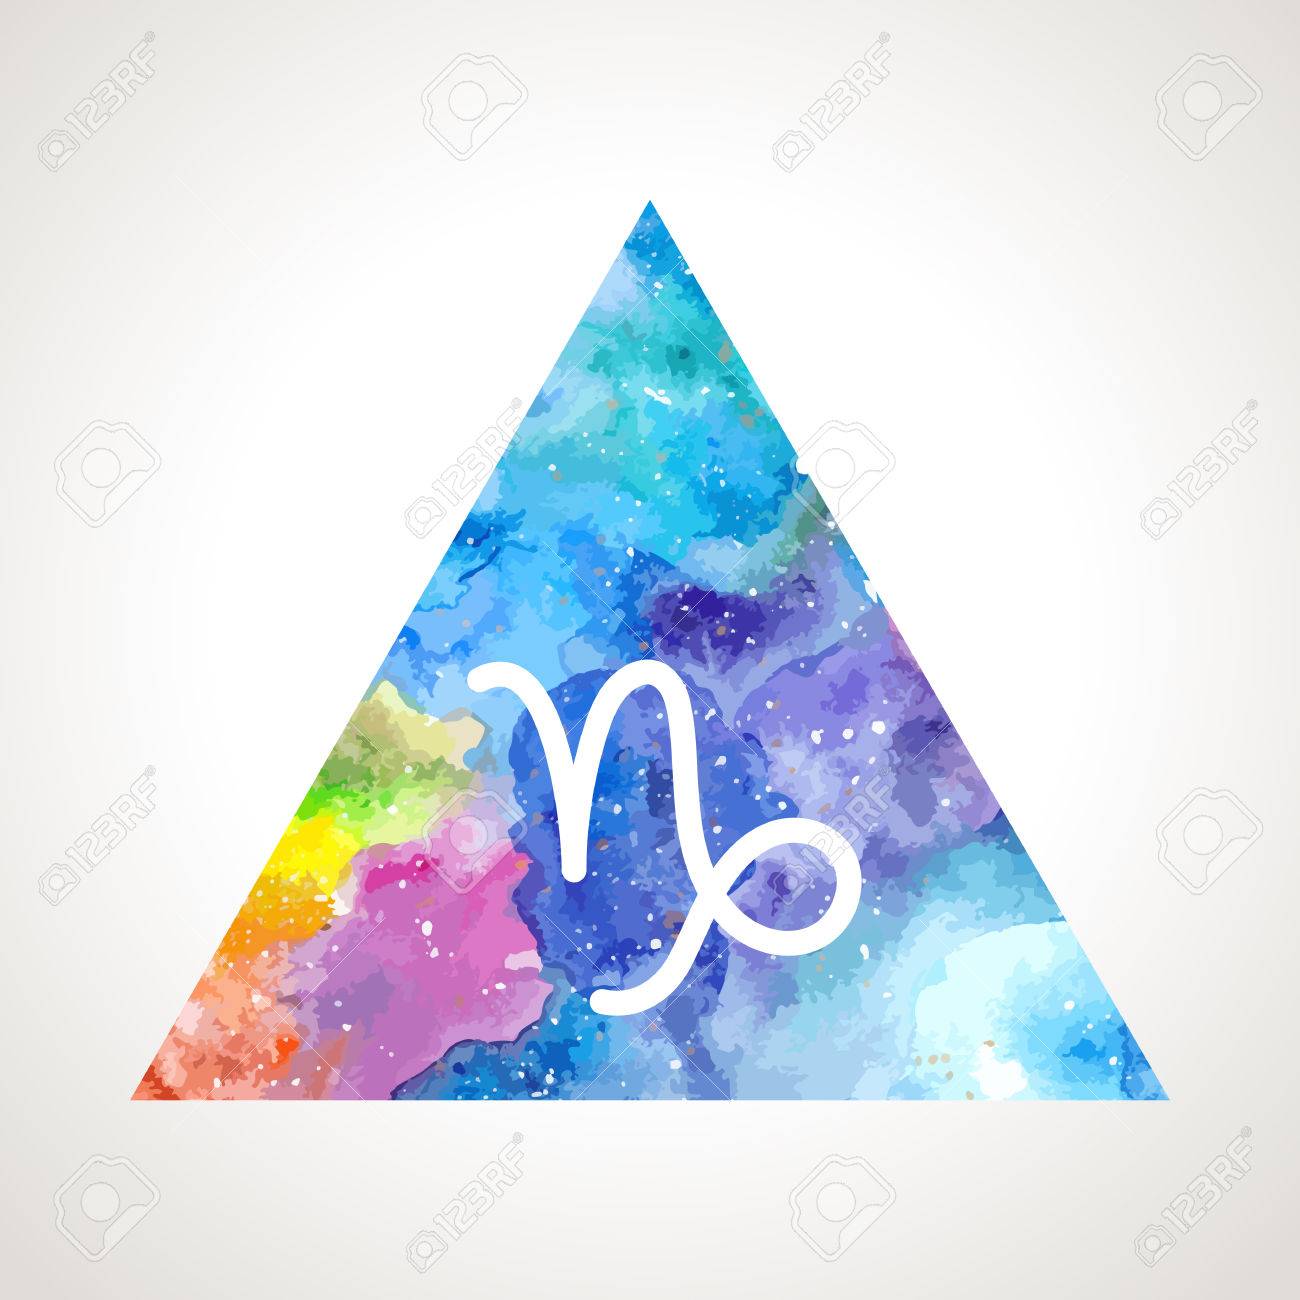 Capricorn Zodiac Sign On Watercolor Triangle Background Astrology